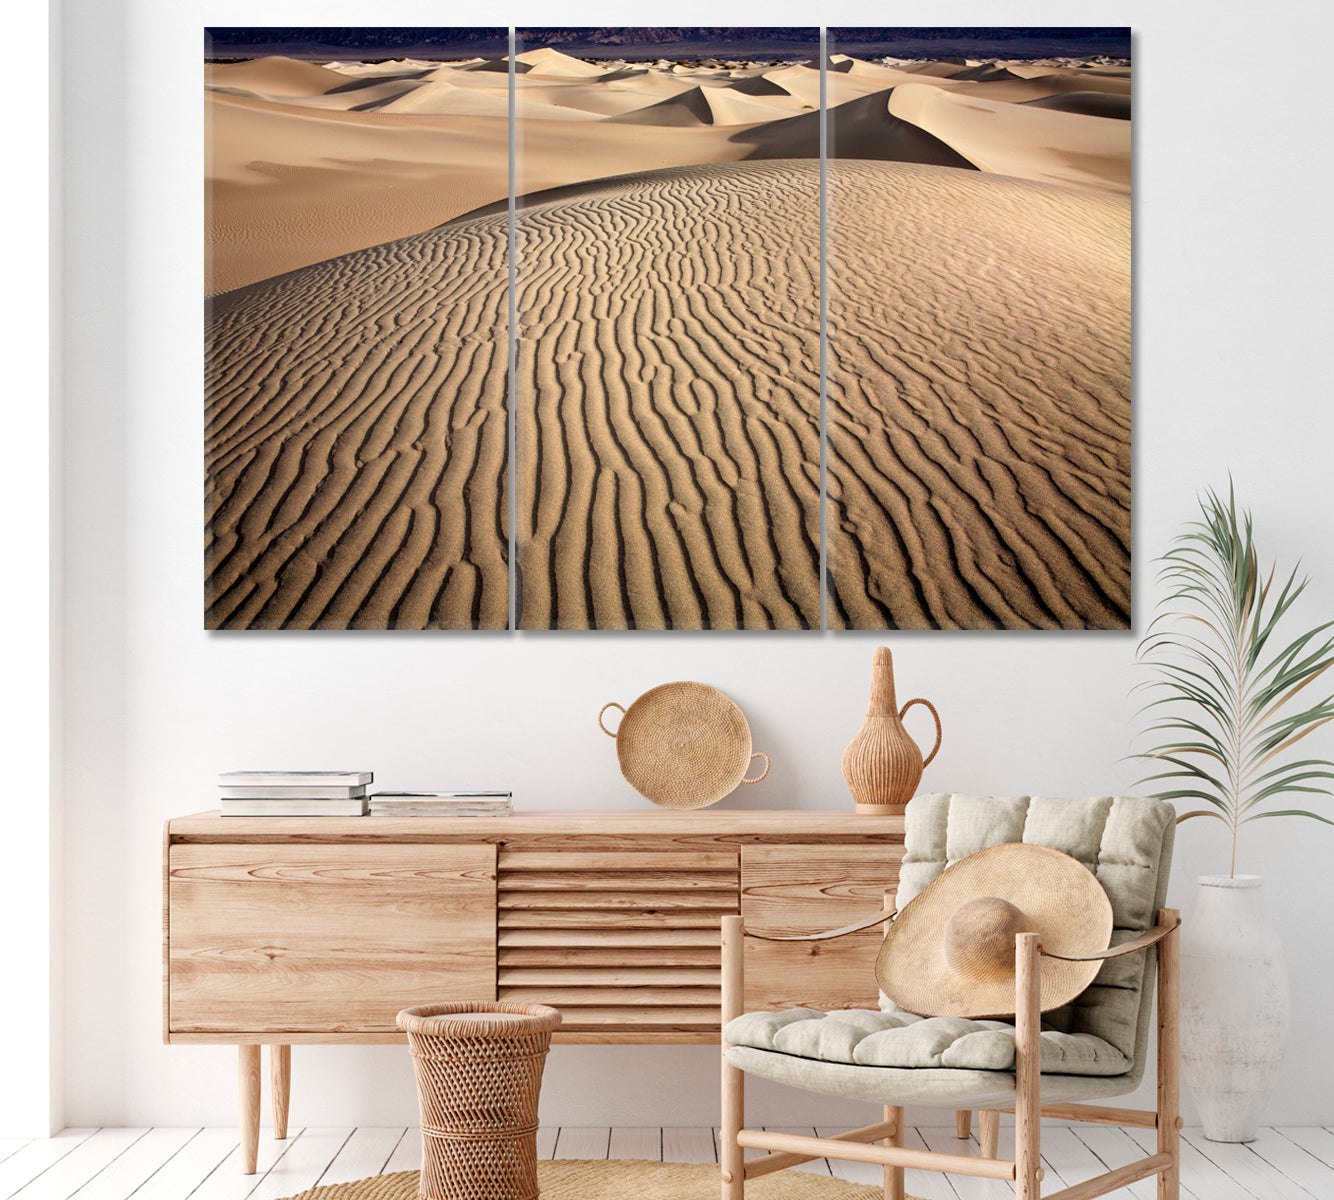 Death Valley National Park California Canvas Print ArtLexy 3 Panels 36"x24" inches 